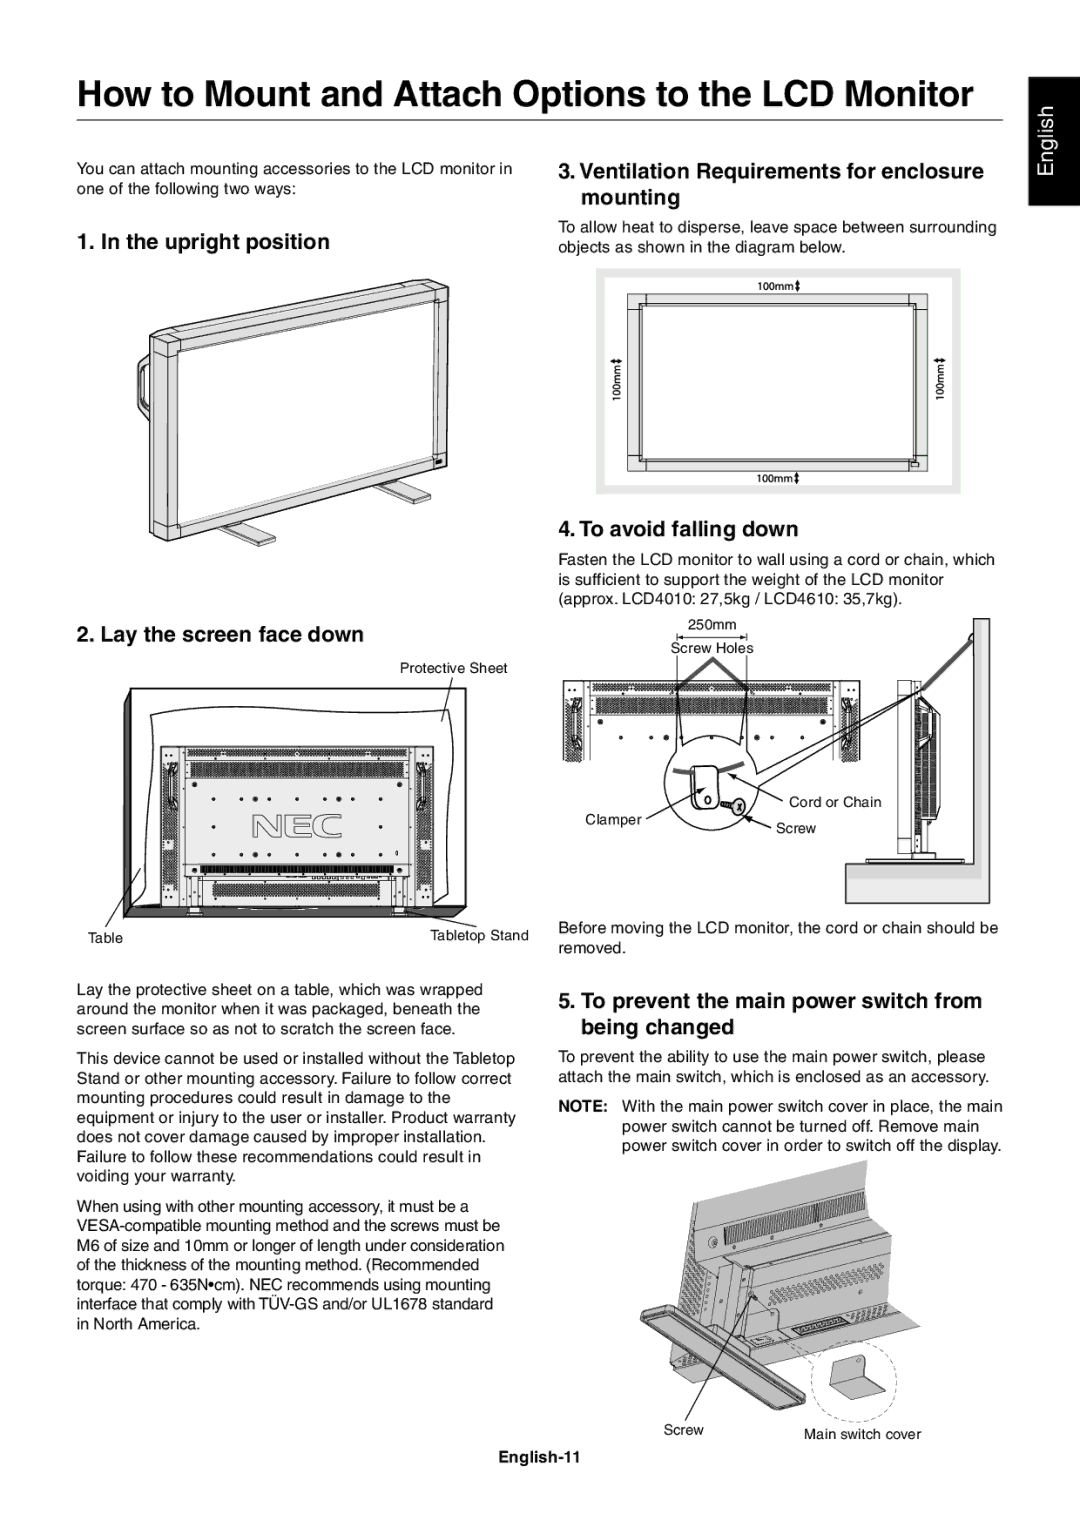 NEC LCD4010, LCD4610 How to Mount and Attach Options to the LCD Monitor, Upright position Lay the screen face down 